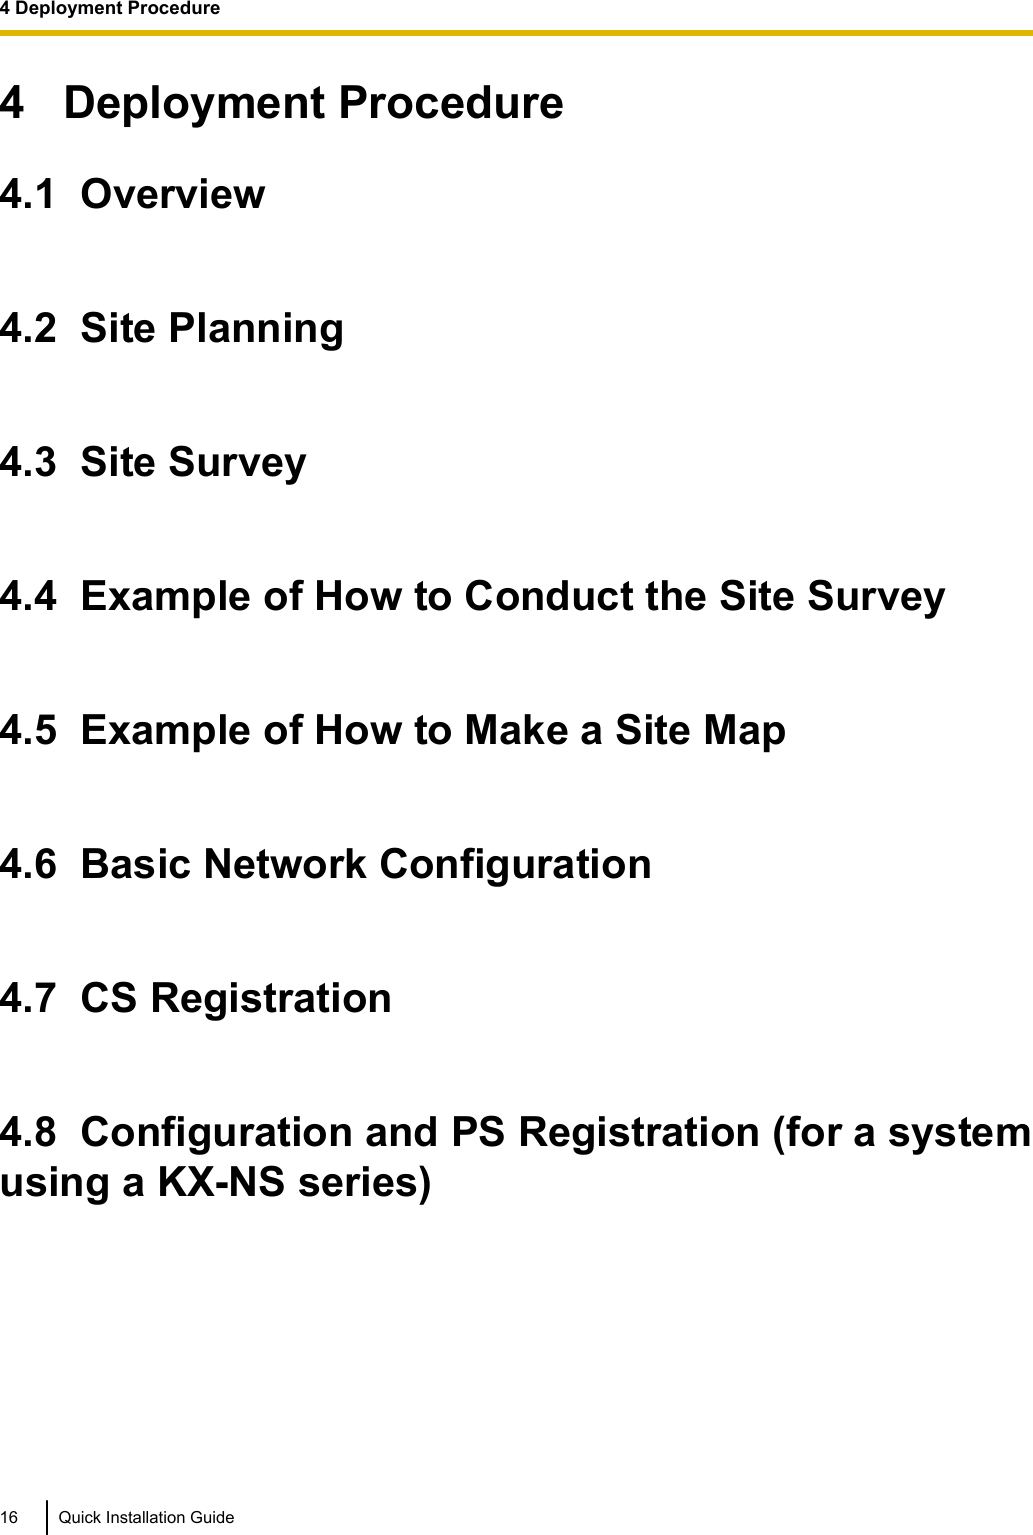 4   Deployment Procedure4.1  Overview4.2  Site Planning4.3  Site Survey4.4  Example of How to Conduct the Site Survey4.5  Example of How to Make a Site Map4.6  Basic Network Configuration4.7  CS Registration4.8  Configuration and PS Registration (for a systemusing a KX-NS series)16 Quick Installation Guide4 Deployment Procedure